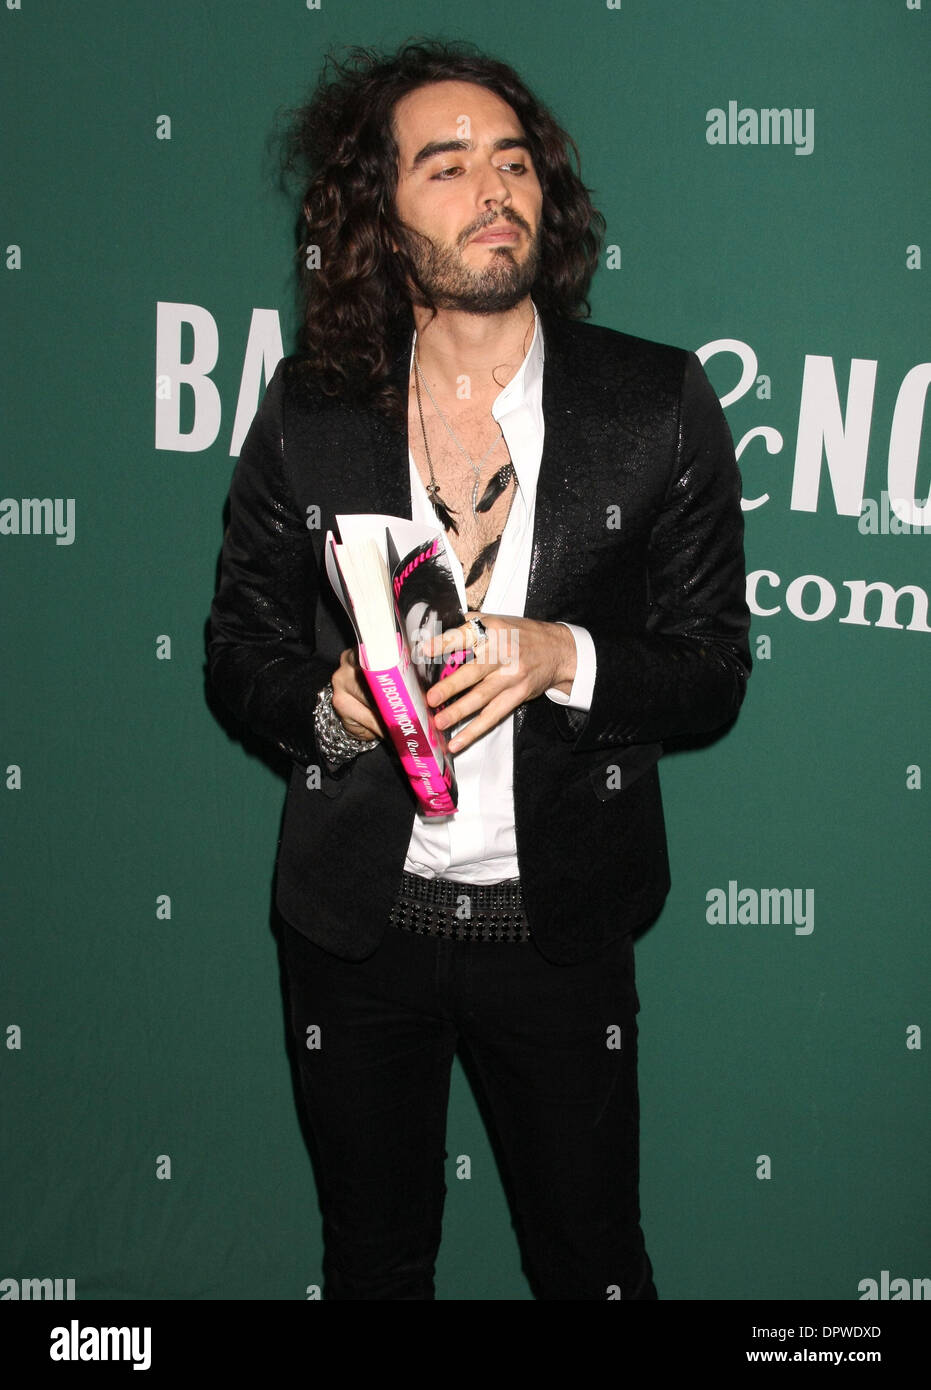 Mar 11, 2009 - New York, NY, USA - RUSSELL BRAND signs copies of 'Russell Brand: My Booky Wook' at Barnes an Noble in Union Square. (Credit Image: © Dan Herrick/KPA-ZUMA/ZUMA Press) Stock Photo